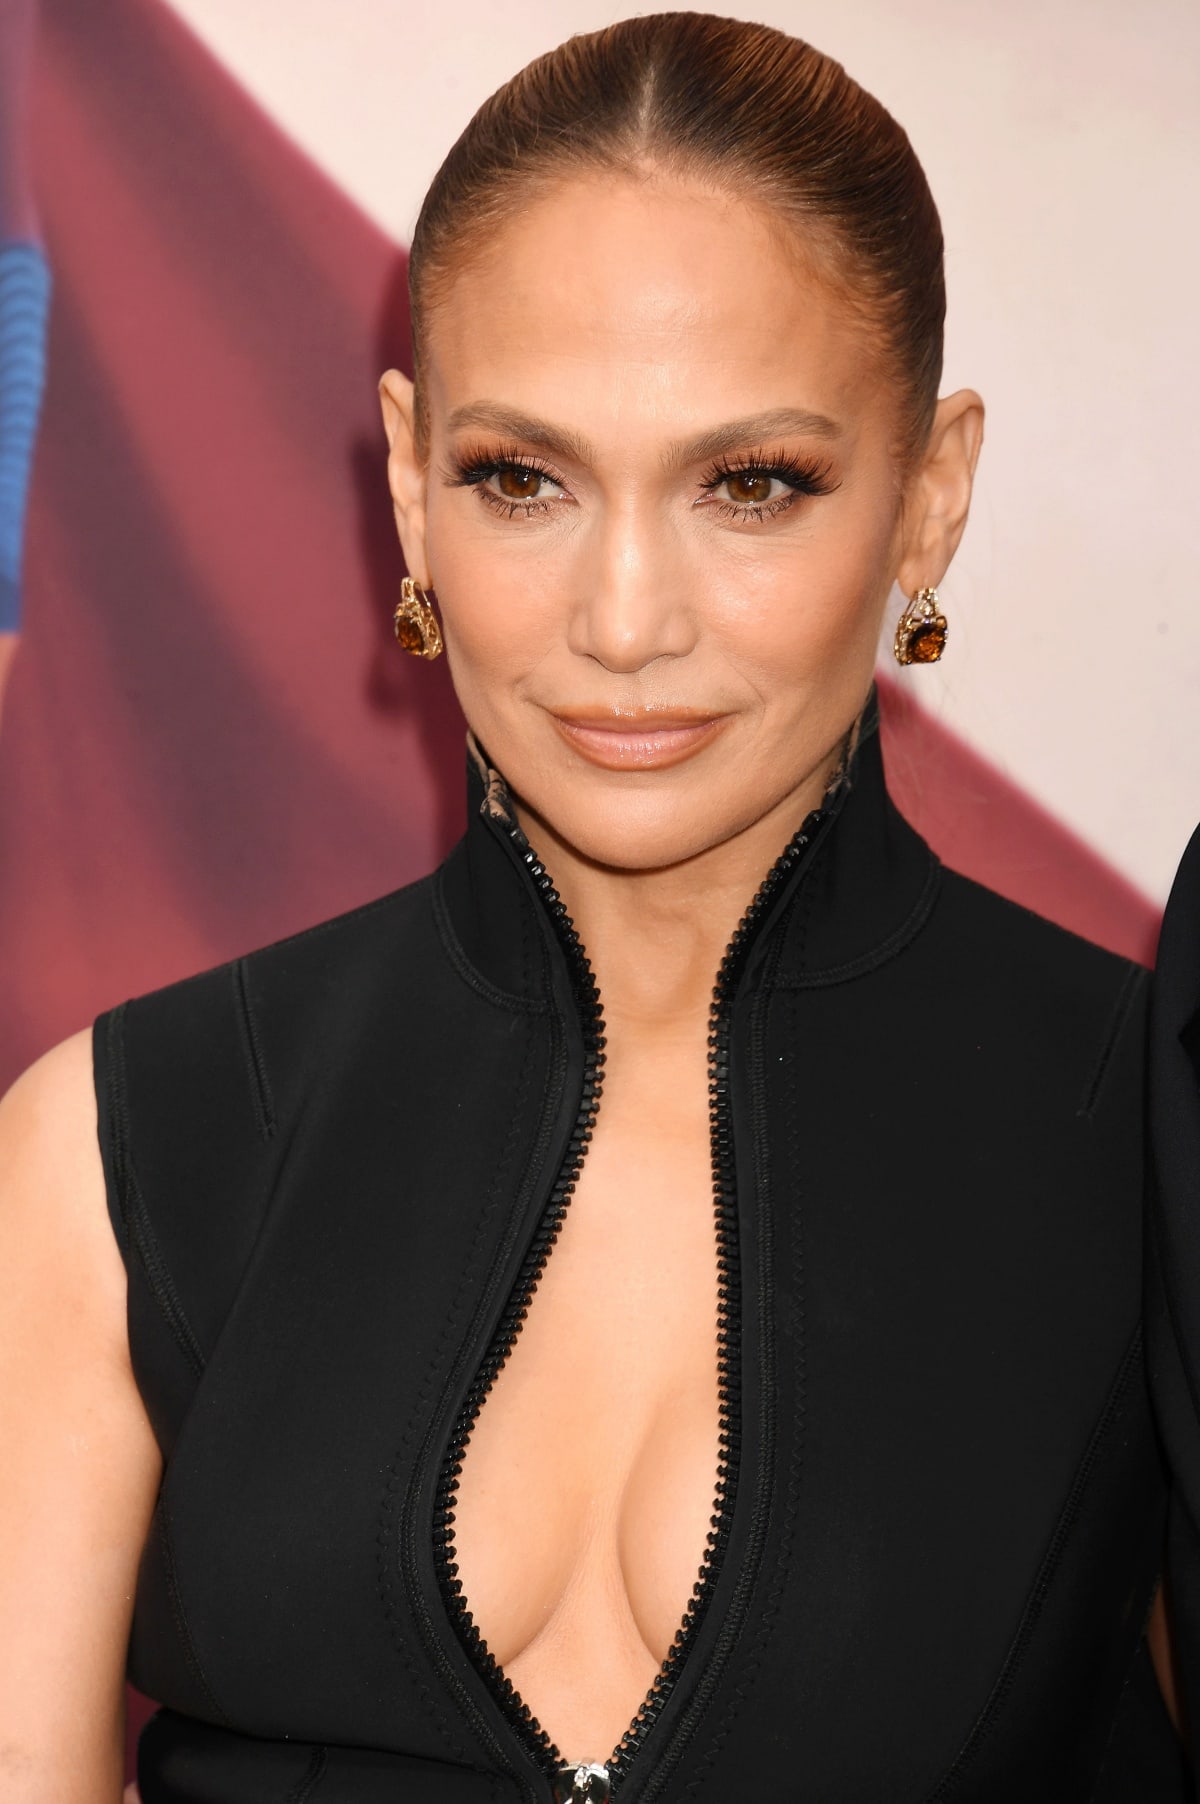 Jennifer Lopez showing off her flawless beauty look, diamond drop earrings, and decolletage in her plunging Gucci wetsuit-inspired dress